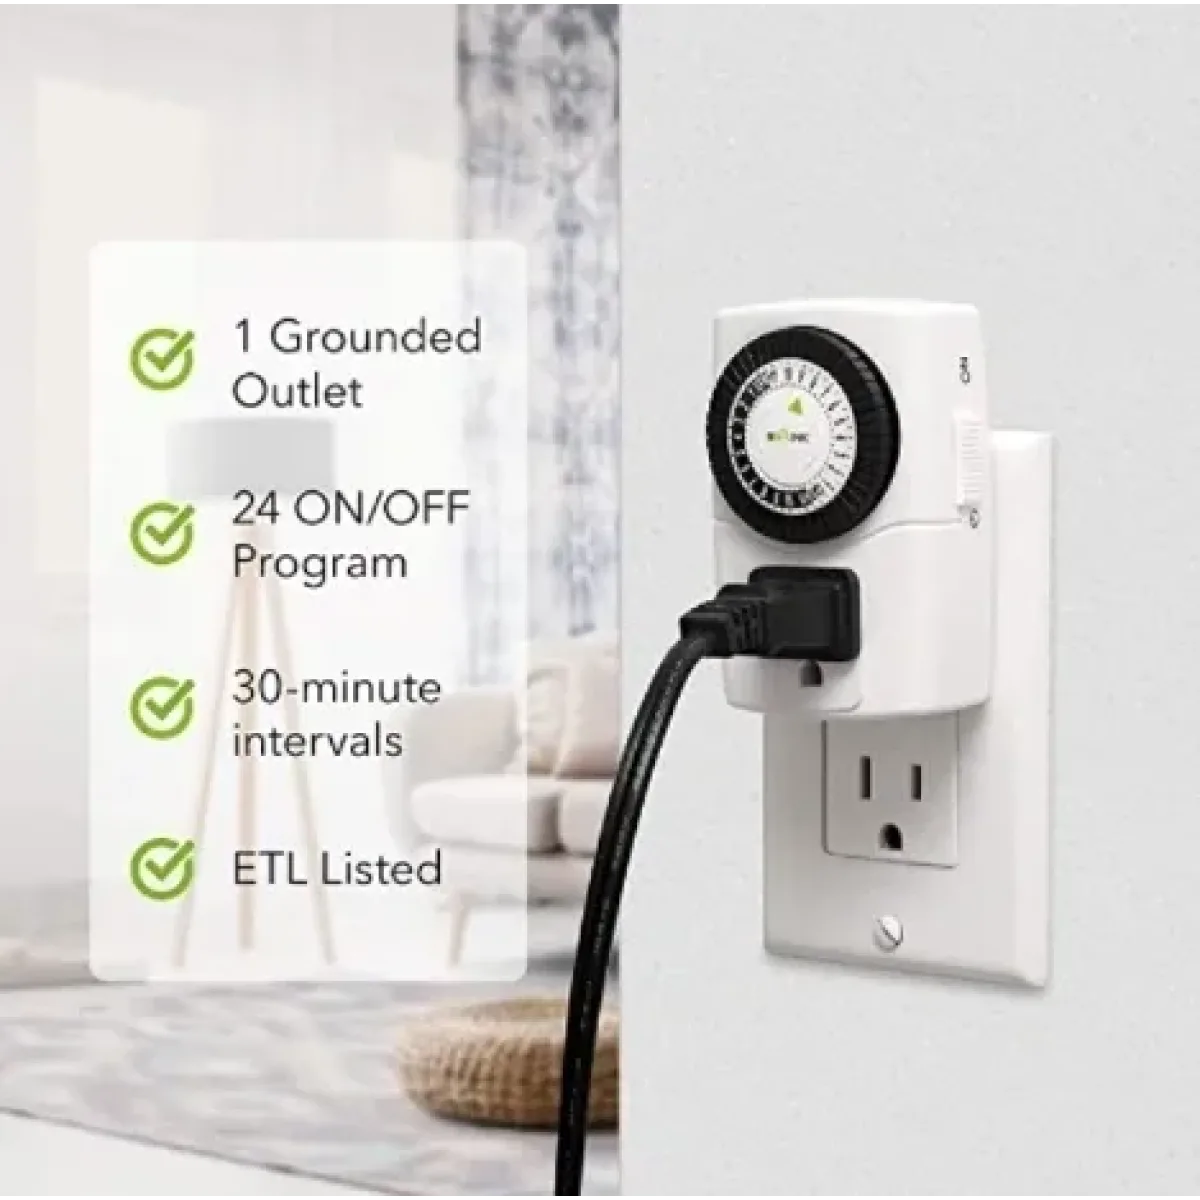 Outlet Timer (Purchase) 2